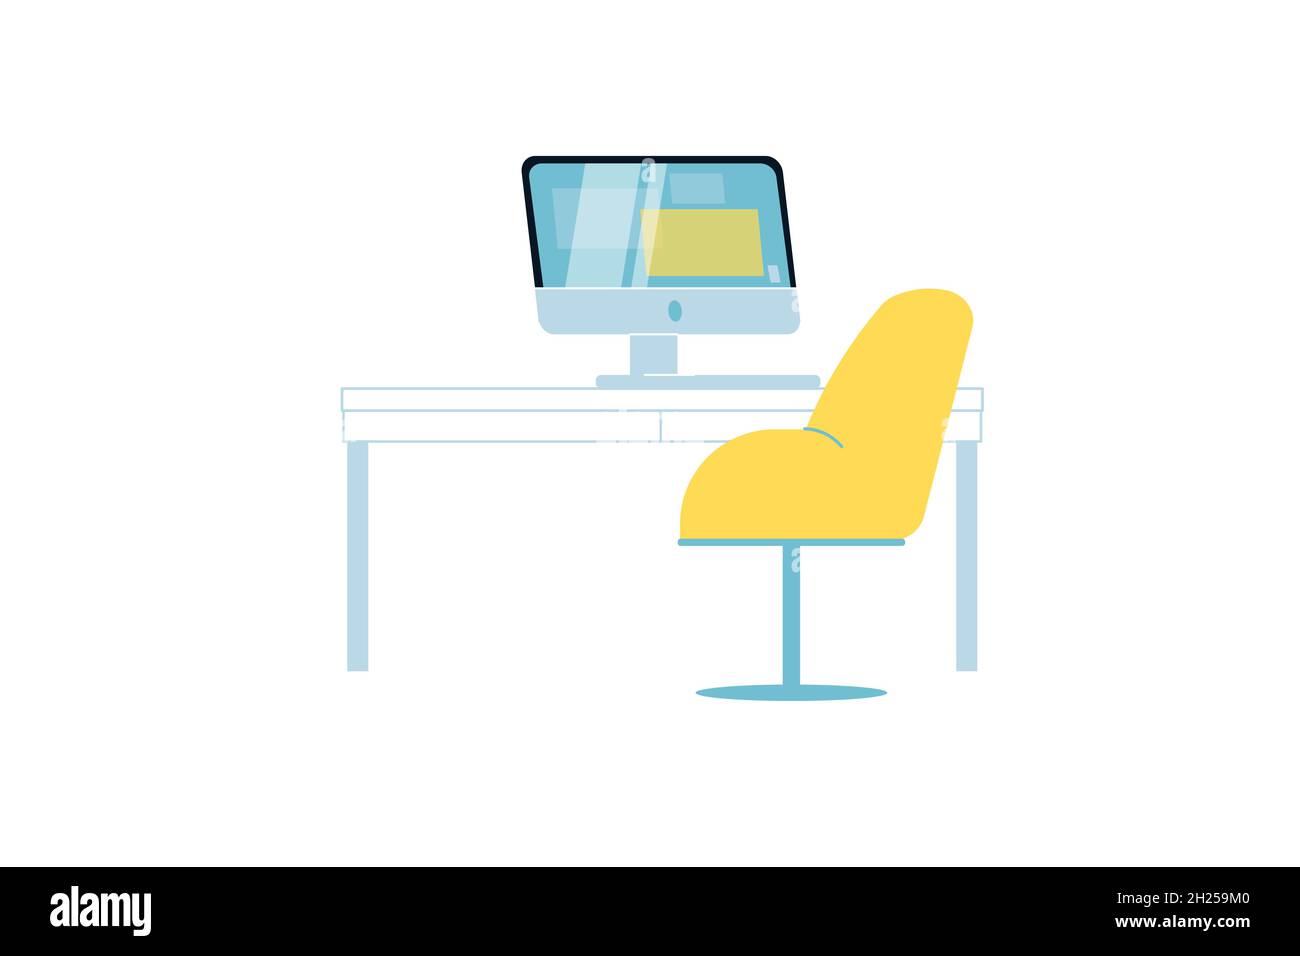 Office desk with work essentials vector design. Stock Vector by